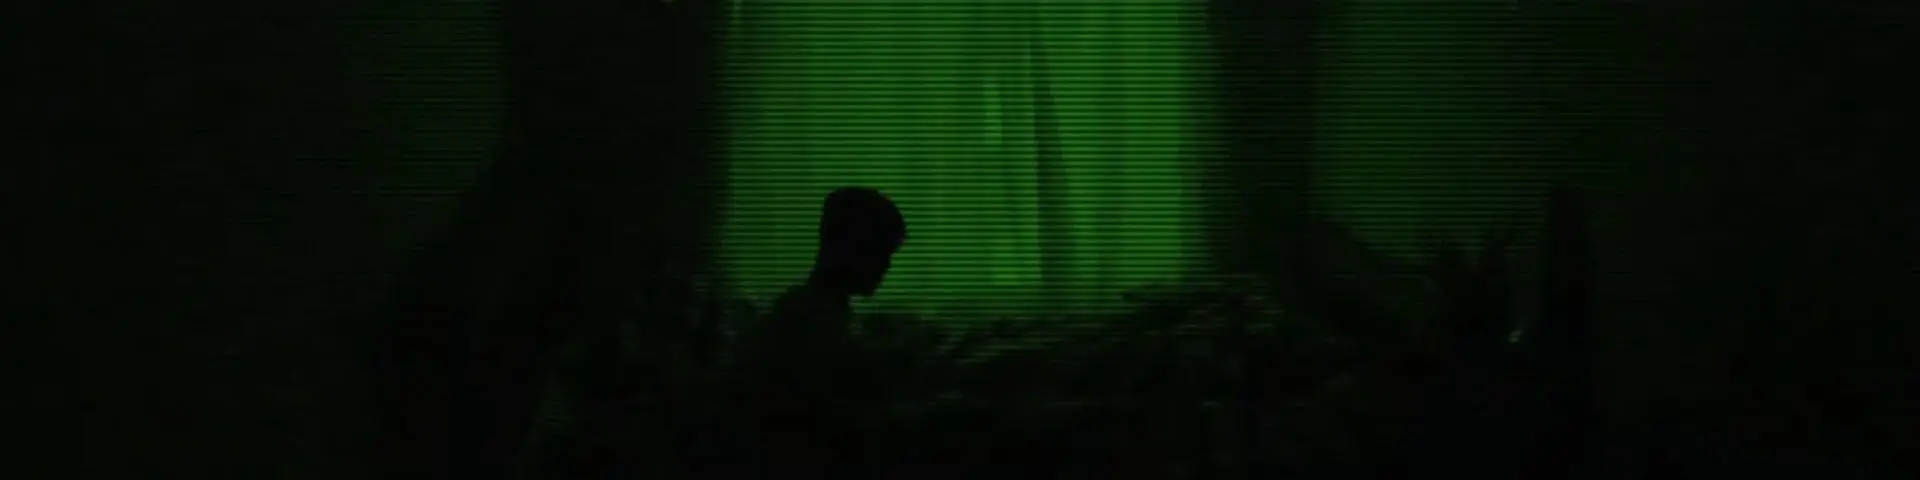 A shot from Nathan's film: a boy sitting up in the dark, shown in 'night vision' green